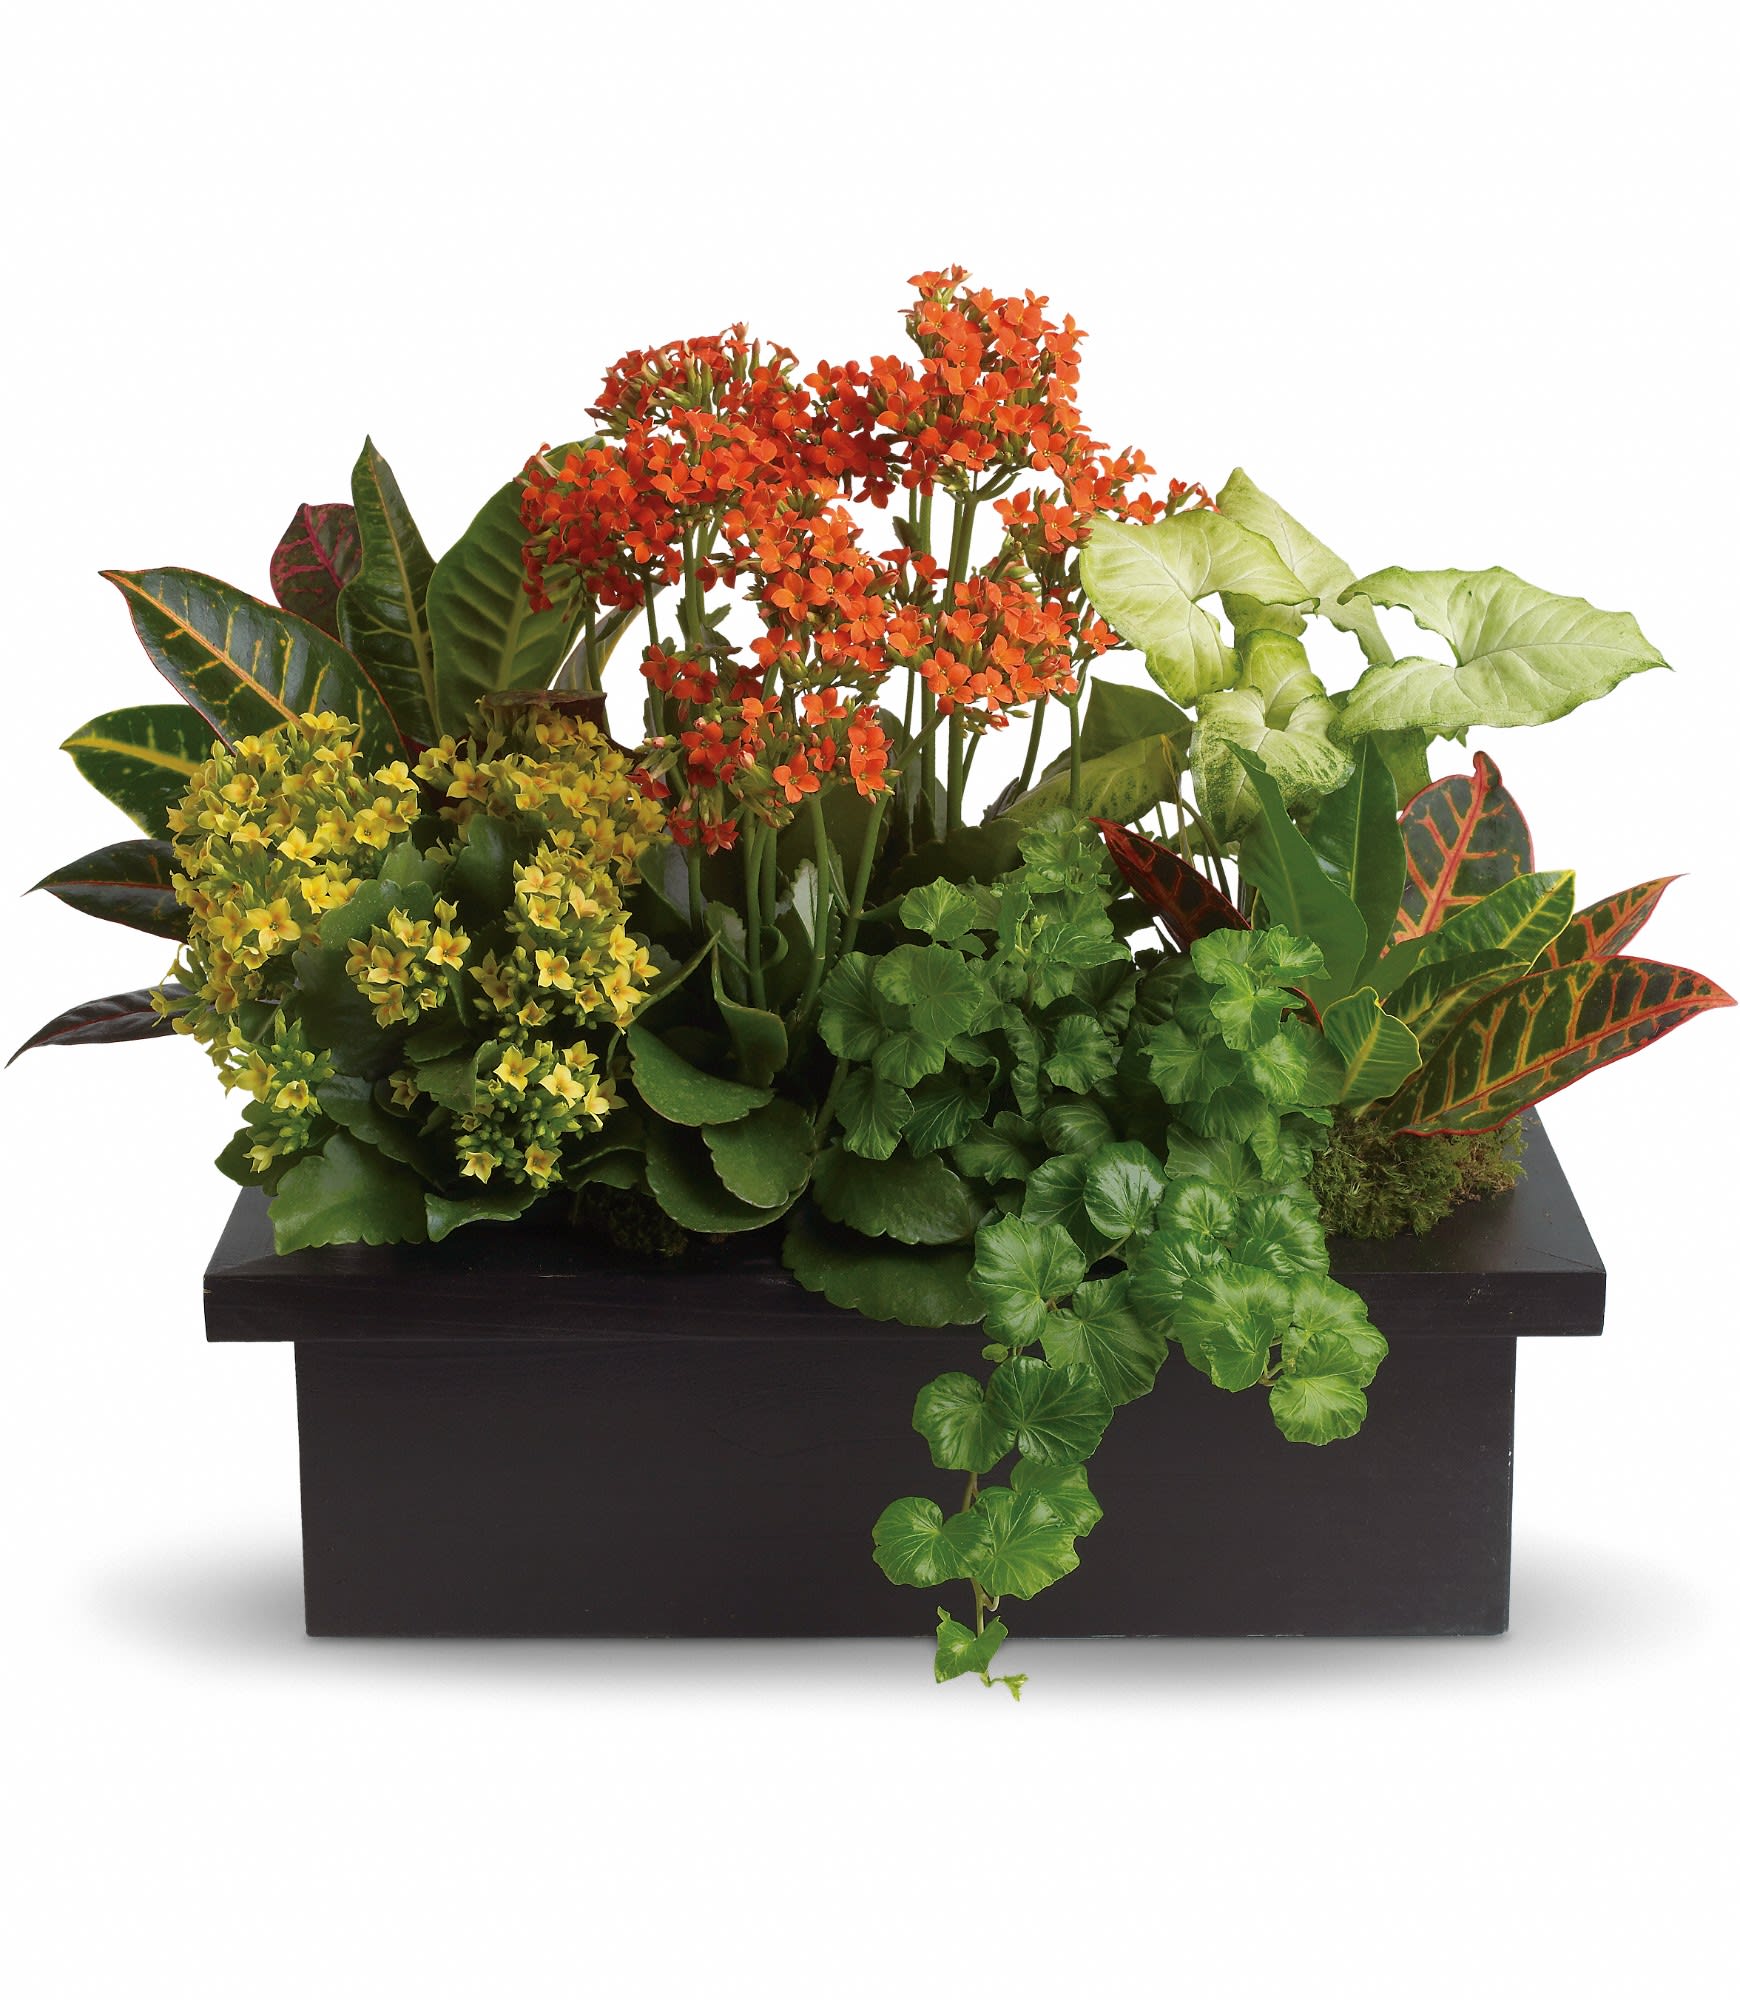 Goldfinger crotons, bright yellow and orange kalanchoes